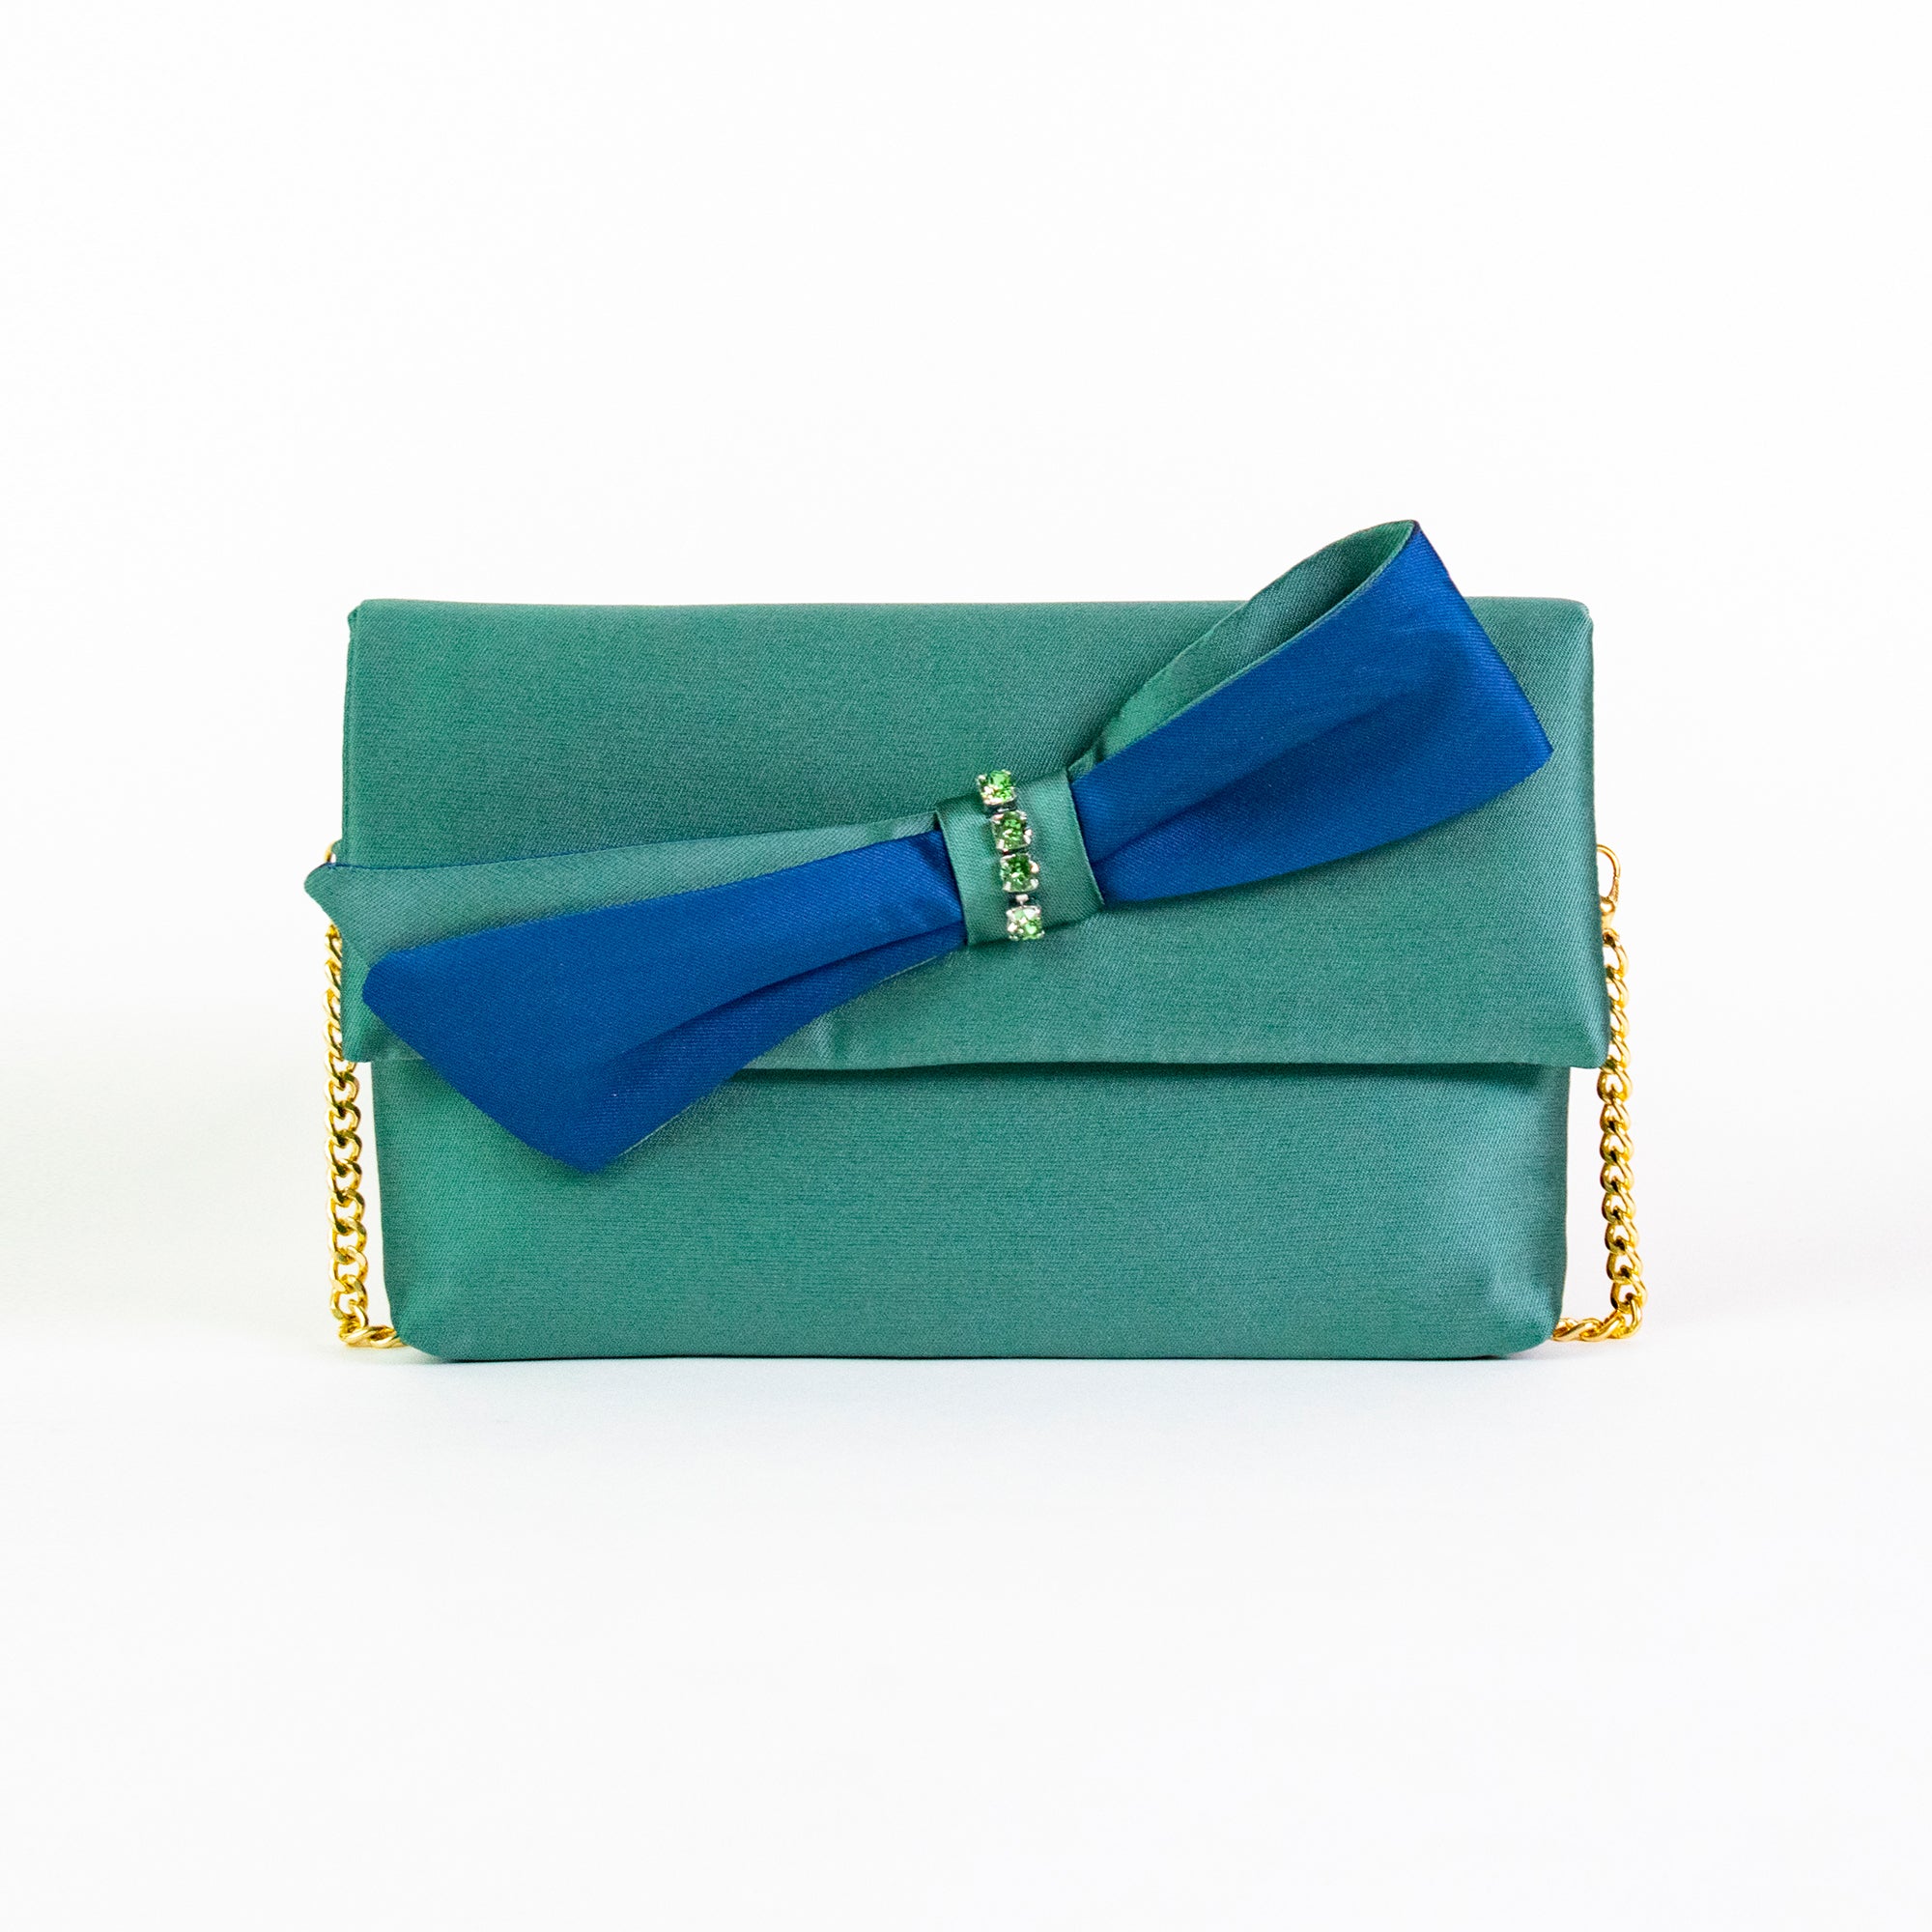 Green clutch bag with bow